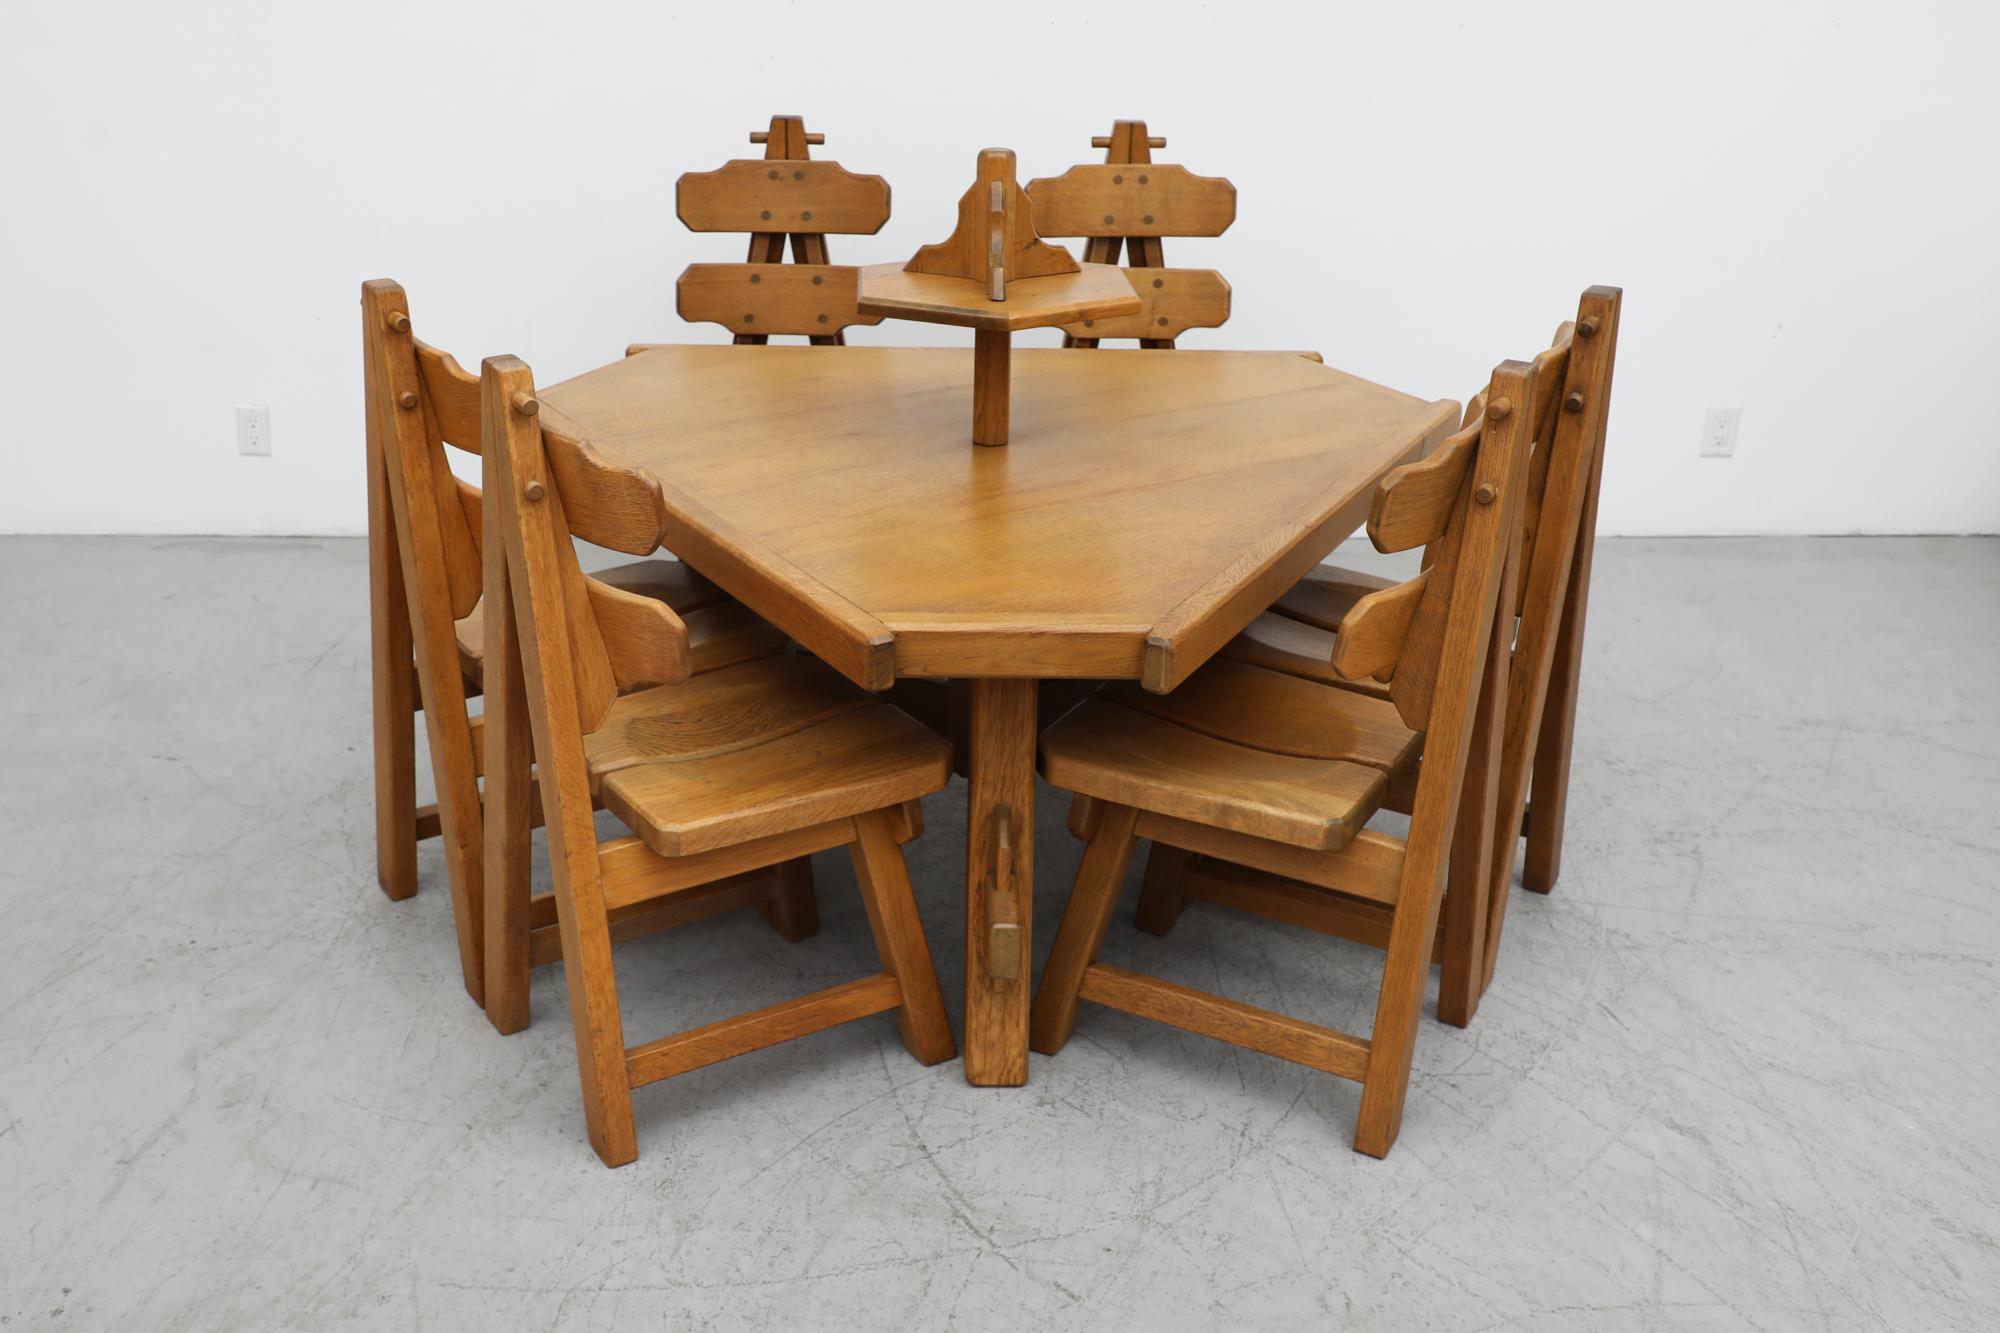 A stunning example of folk furniture most commonly found in Southern Germany, Austria, Switzerland, the Czech Republic (i.e., in the Alps and their surroundings) this set of 6 Brutalist heavy dining chairs is made from solid oak with an 